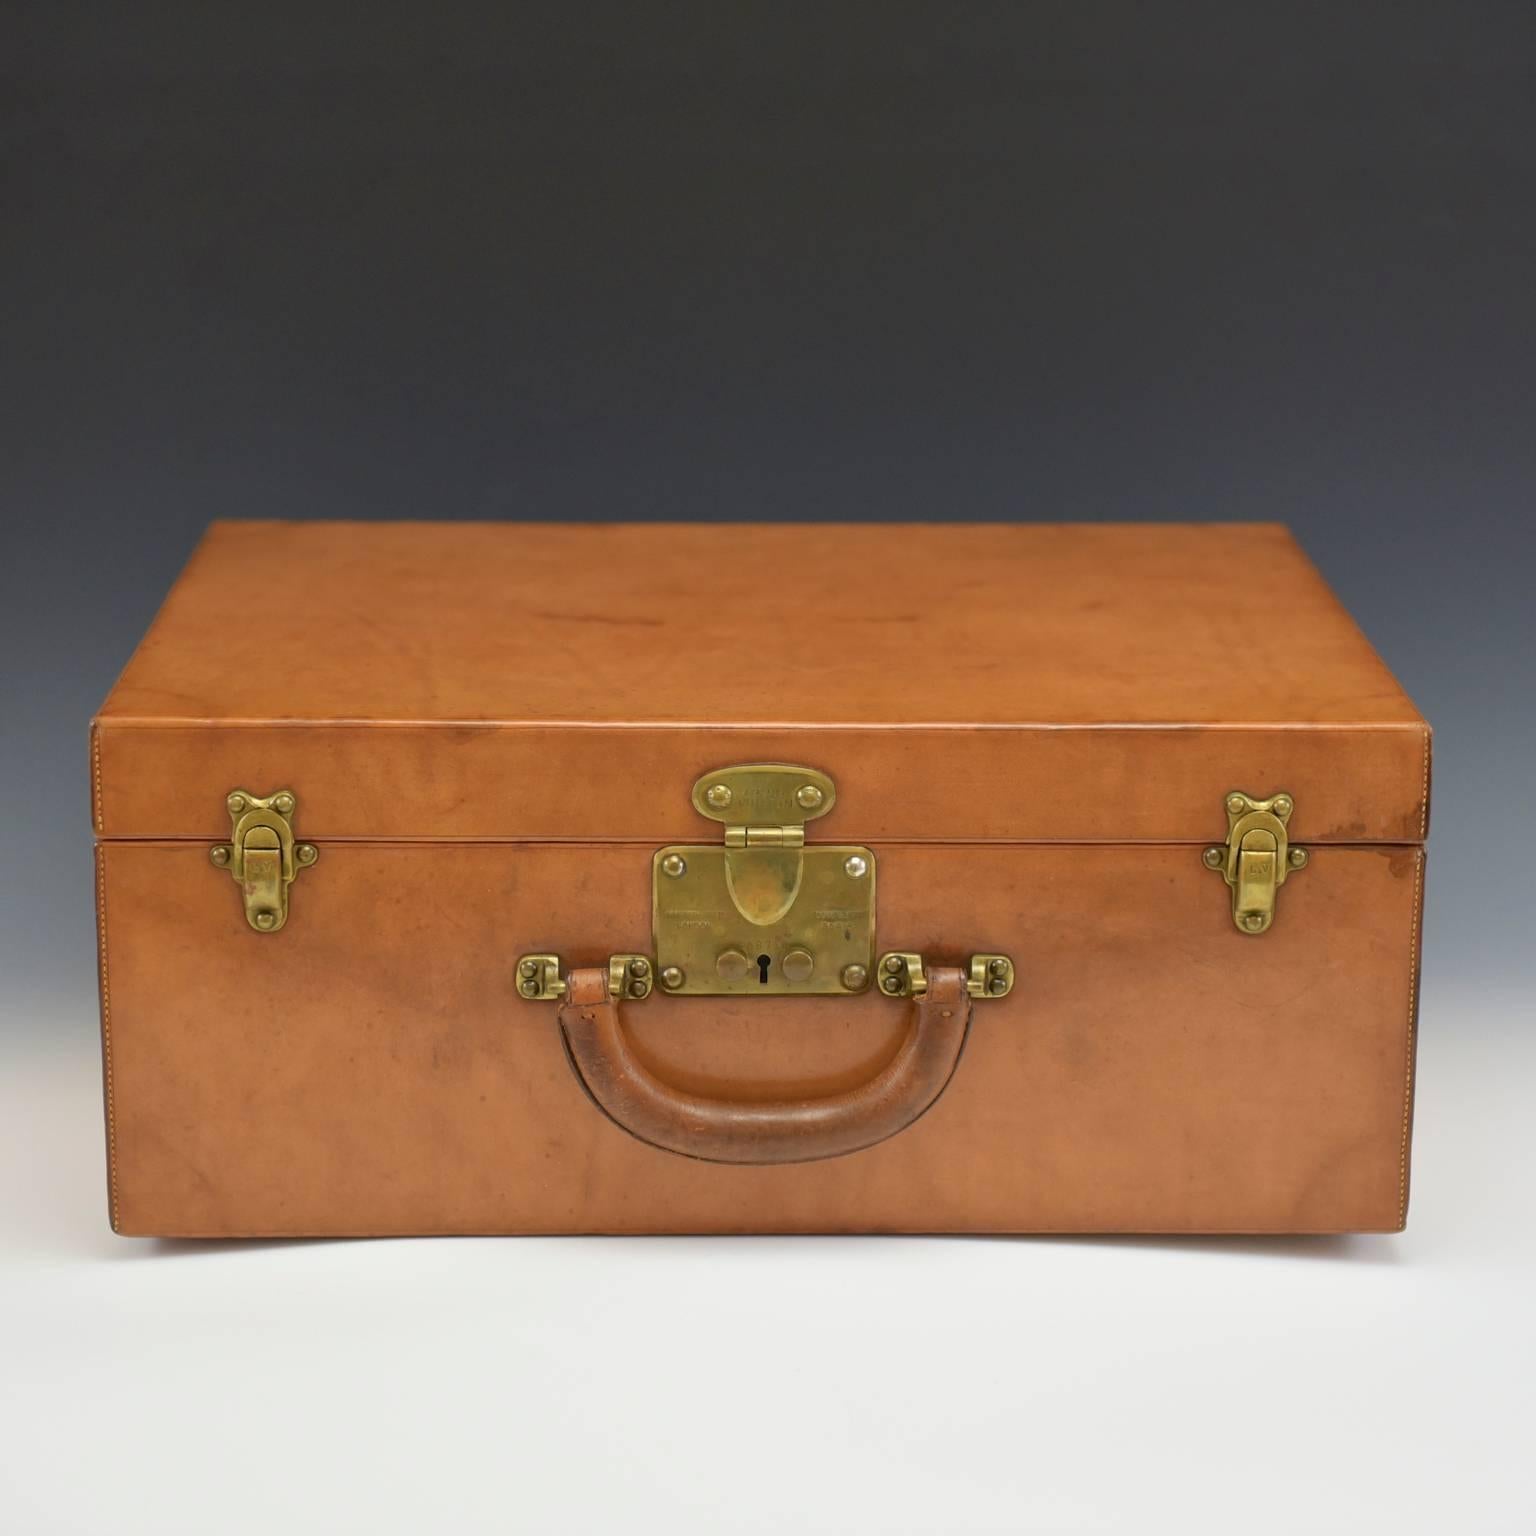 A beautiful Louis Vuitton leather overnight case, circa 1935 in exceptional original condition, ideal for an overnight or weekend away. With original leather interior.

Louis Vuitton opened his first shop on Rue Neuve des Capucines, Paris, France in